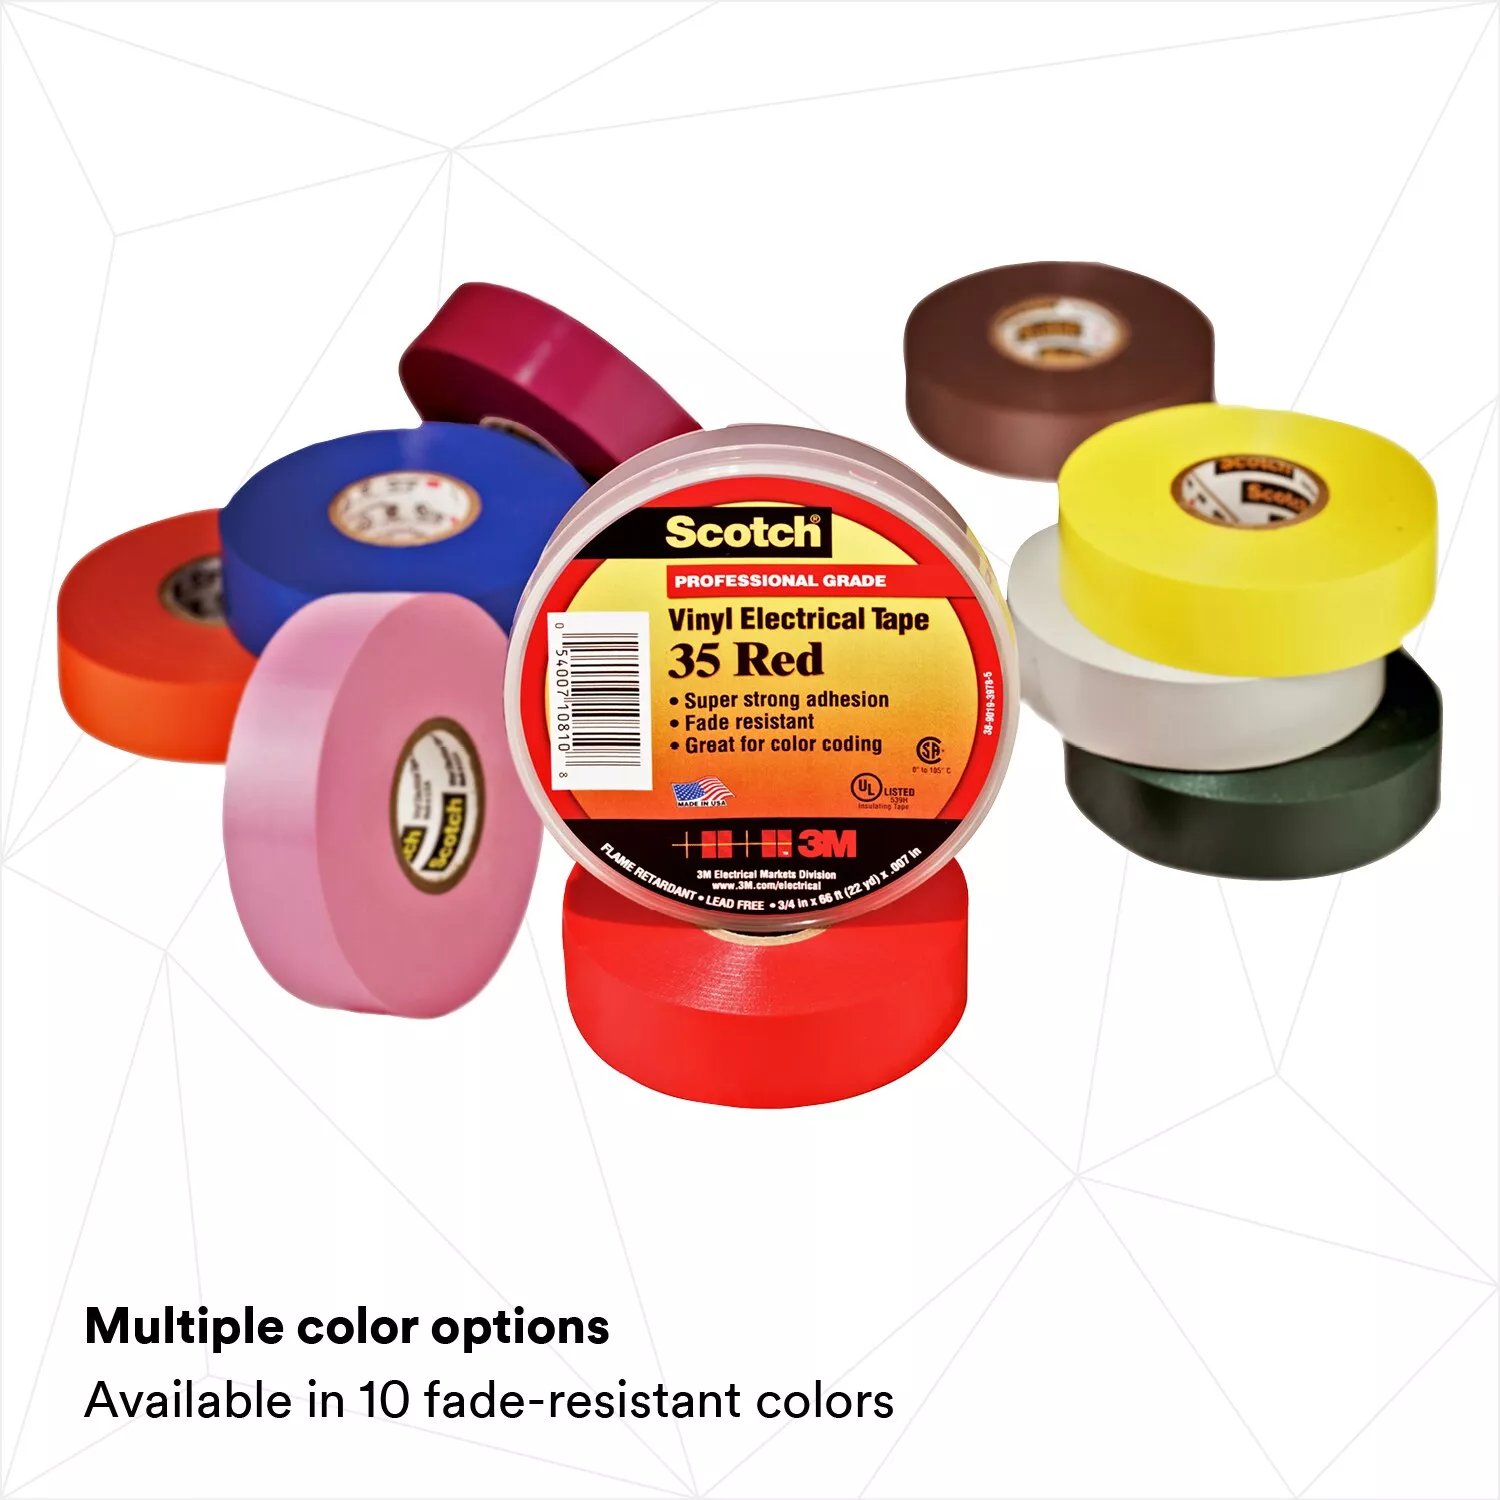 Product Number 35-3/4X66FT-RD | Scotch® Vinyl Color Coding Electrical Tape 35